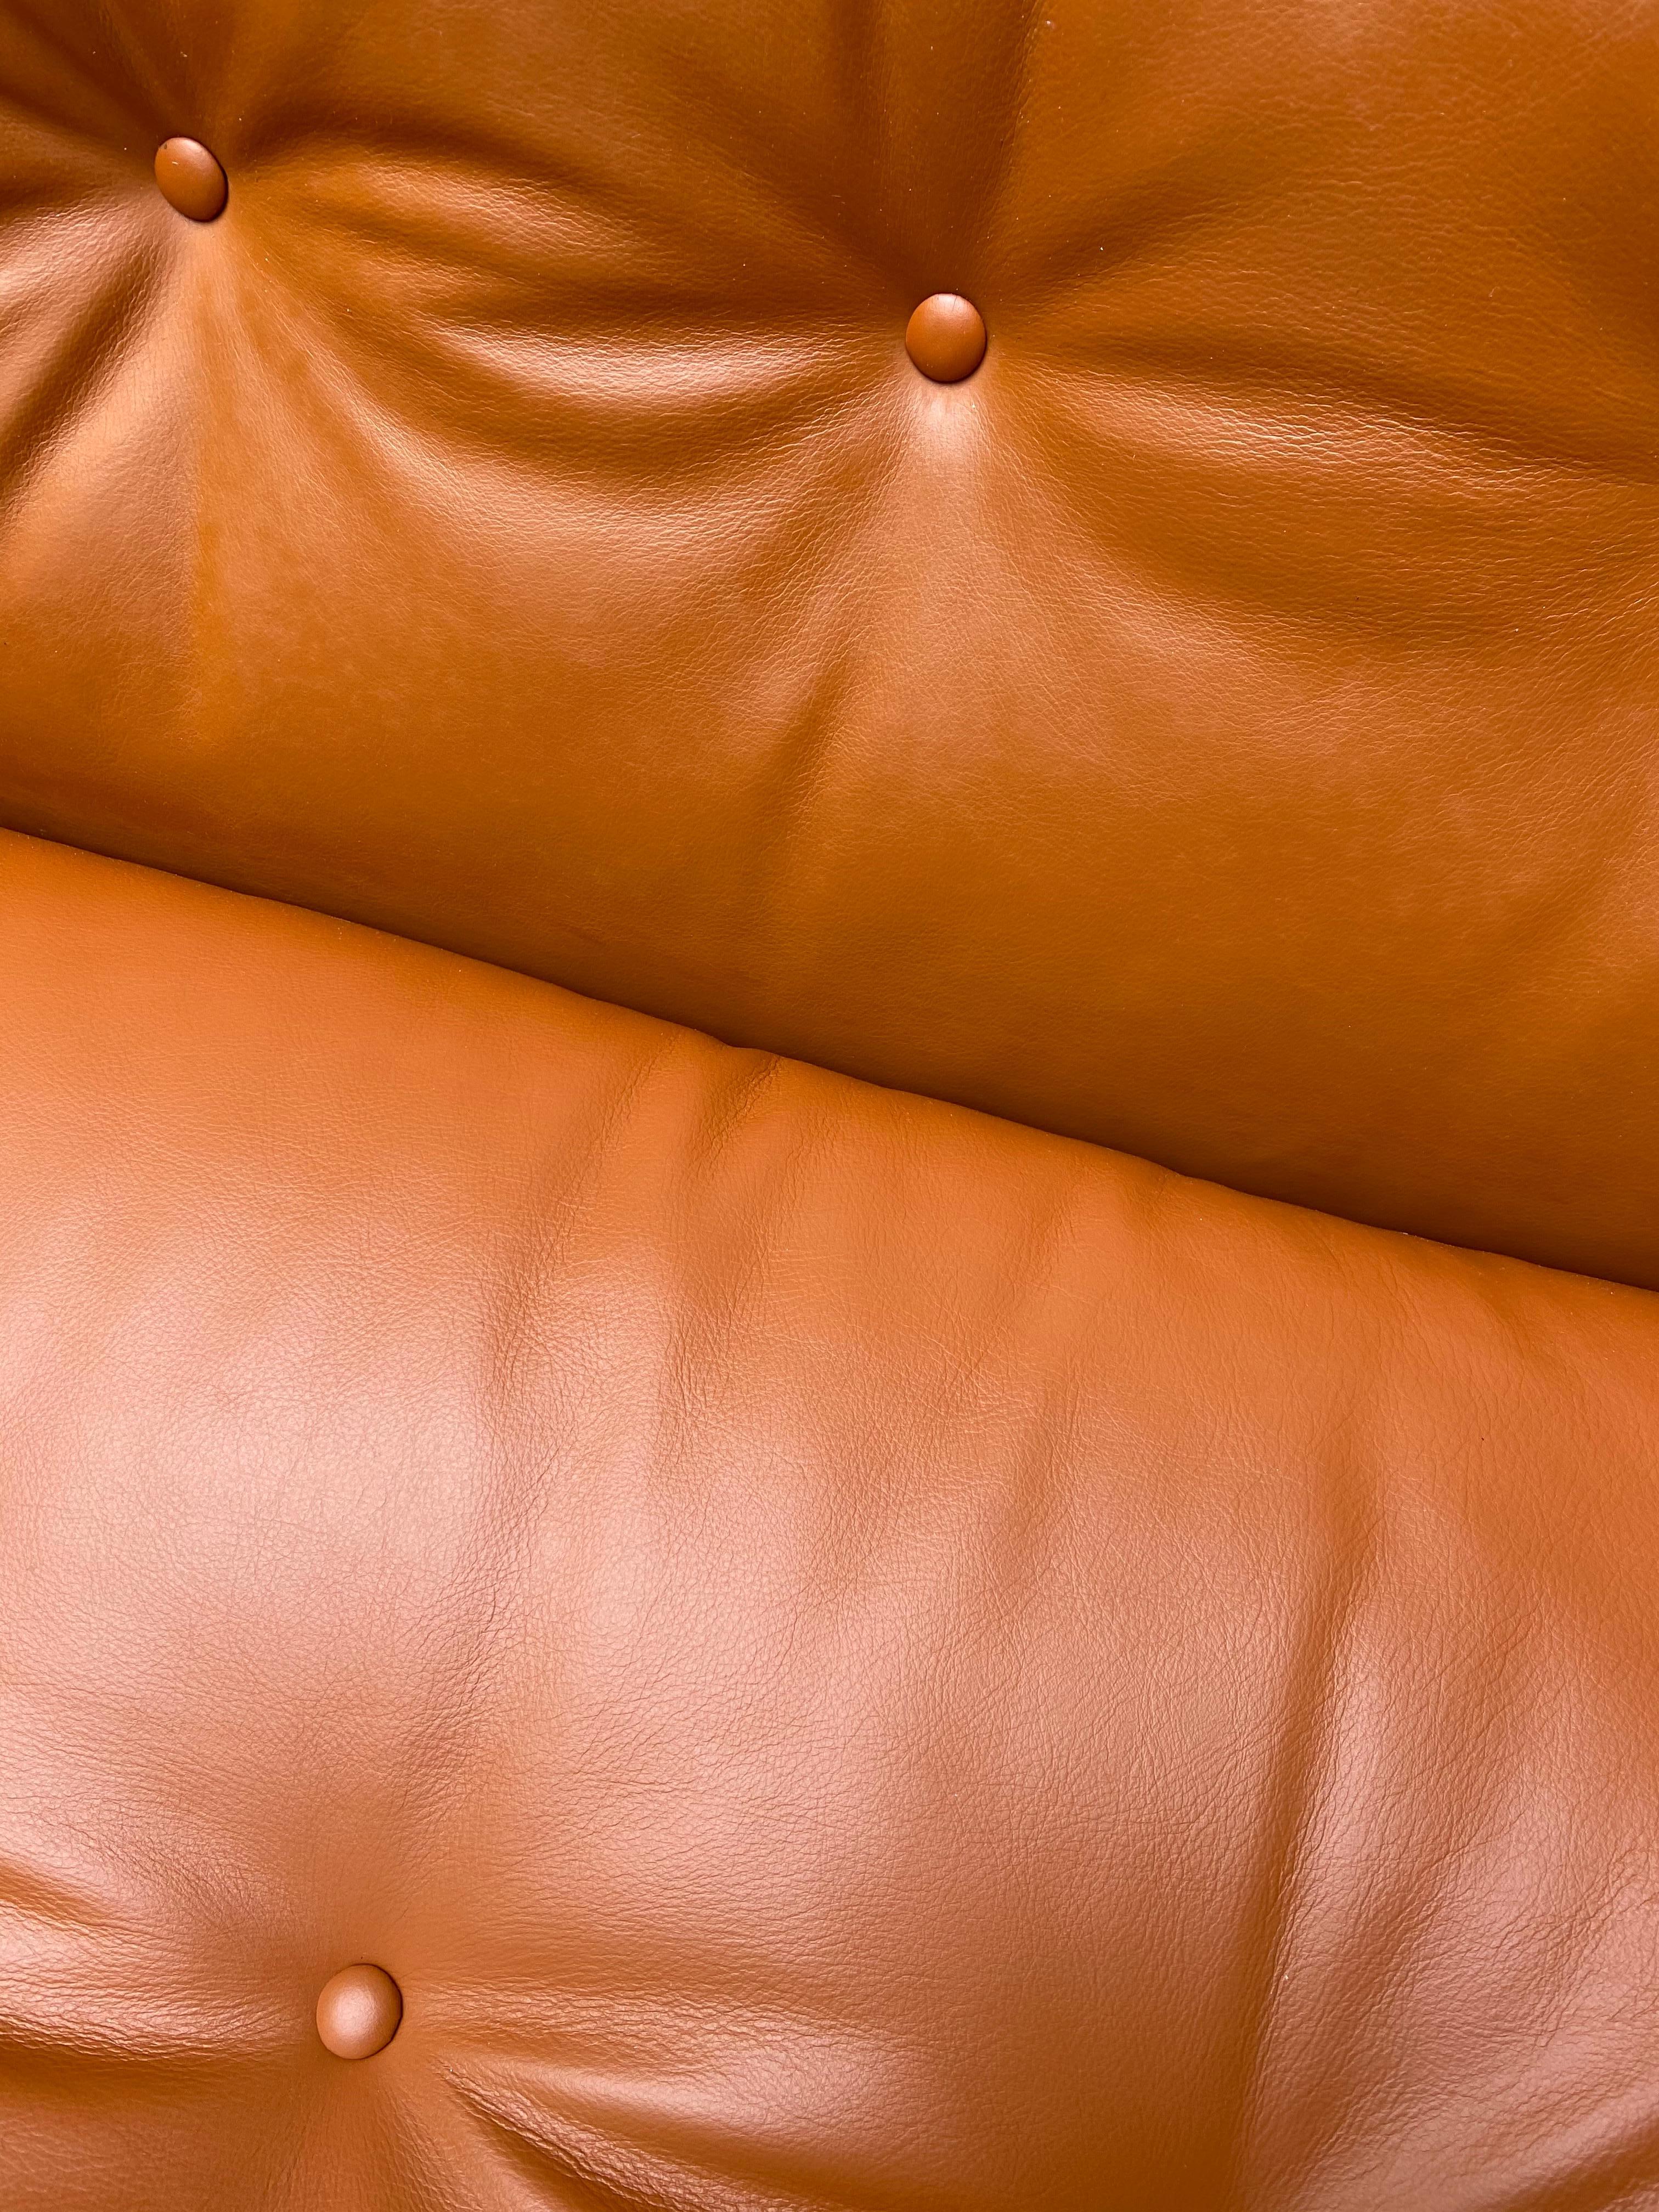 Mario Bellini
4 Amanta armchair 
CetB Italia Edition
Fawn leather/ resin 
Assemblable in sofa
Perfect condition
Measures: H 69 x W 79 x D 78
Circa 1976
4900 euros the 4.